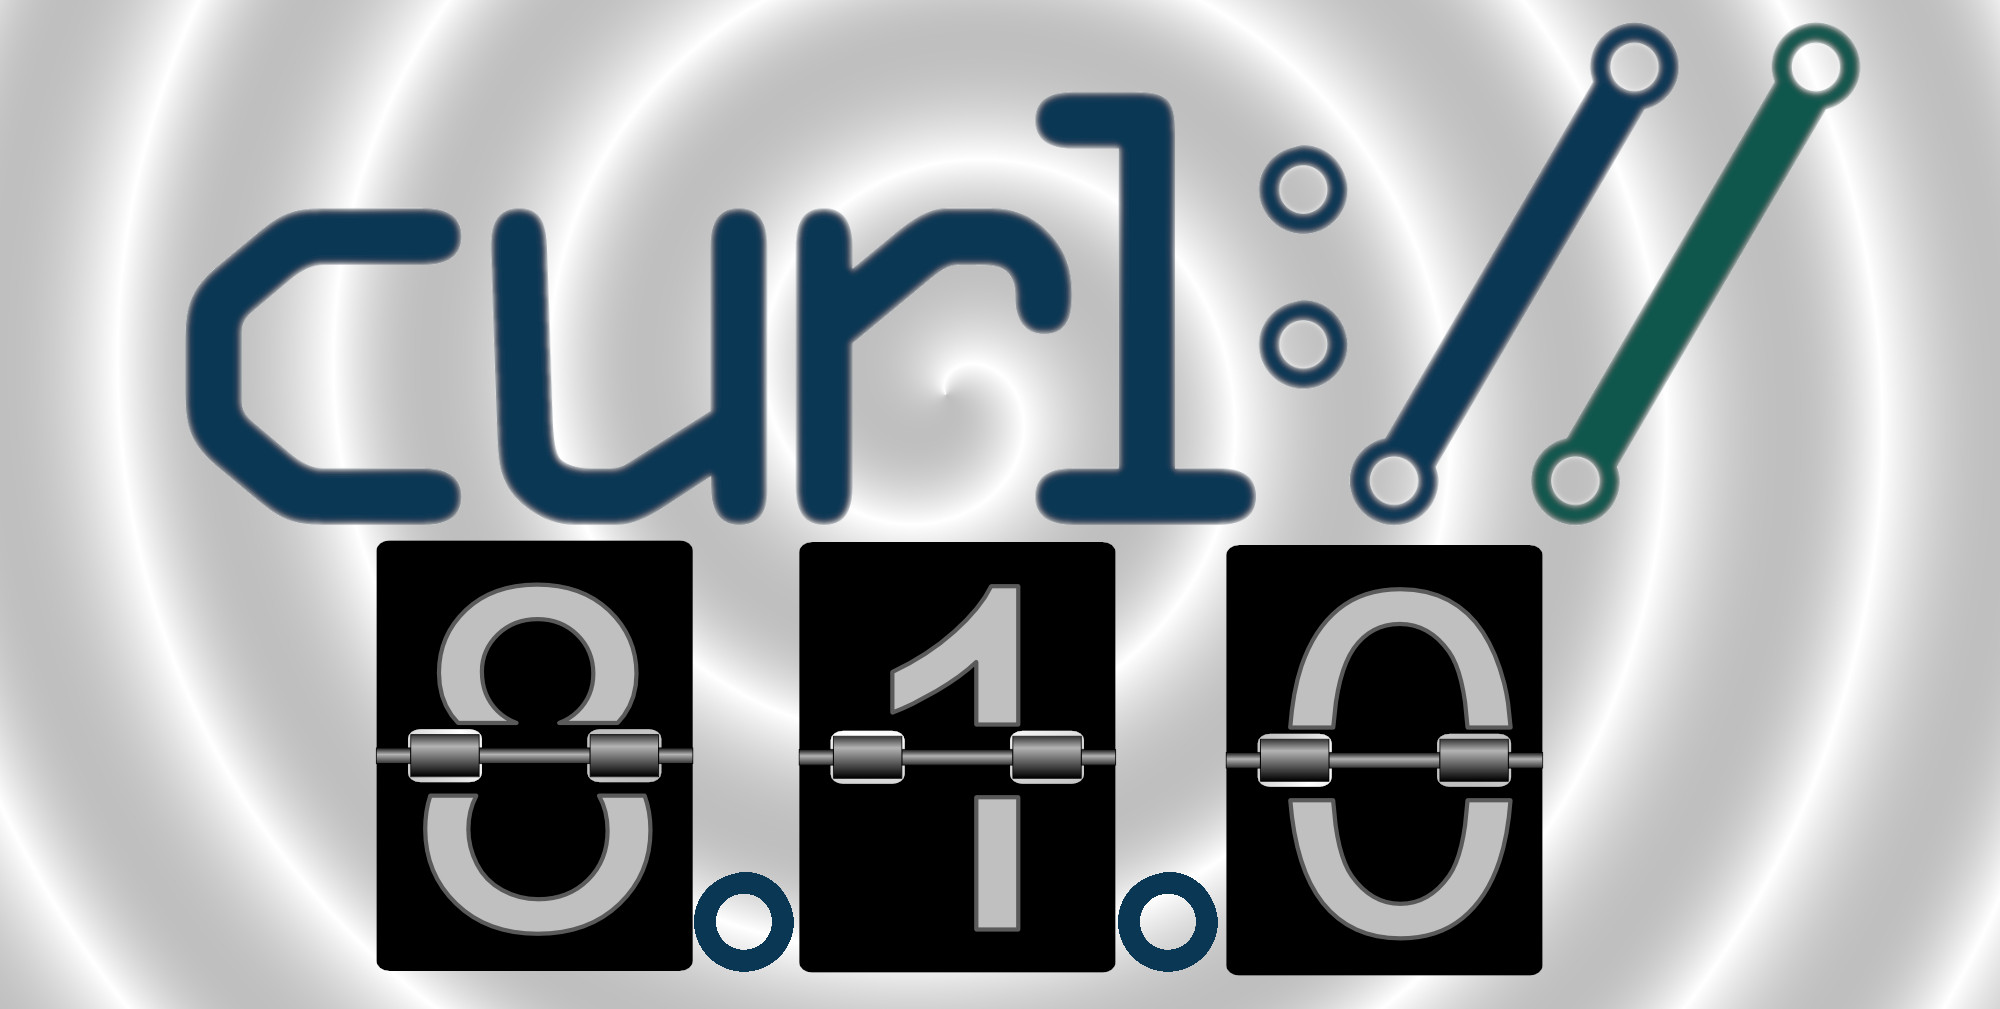 curl 8.1.0 – http2 over proxy